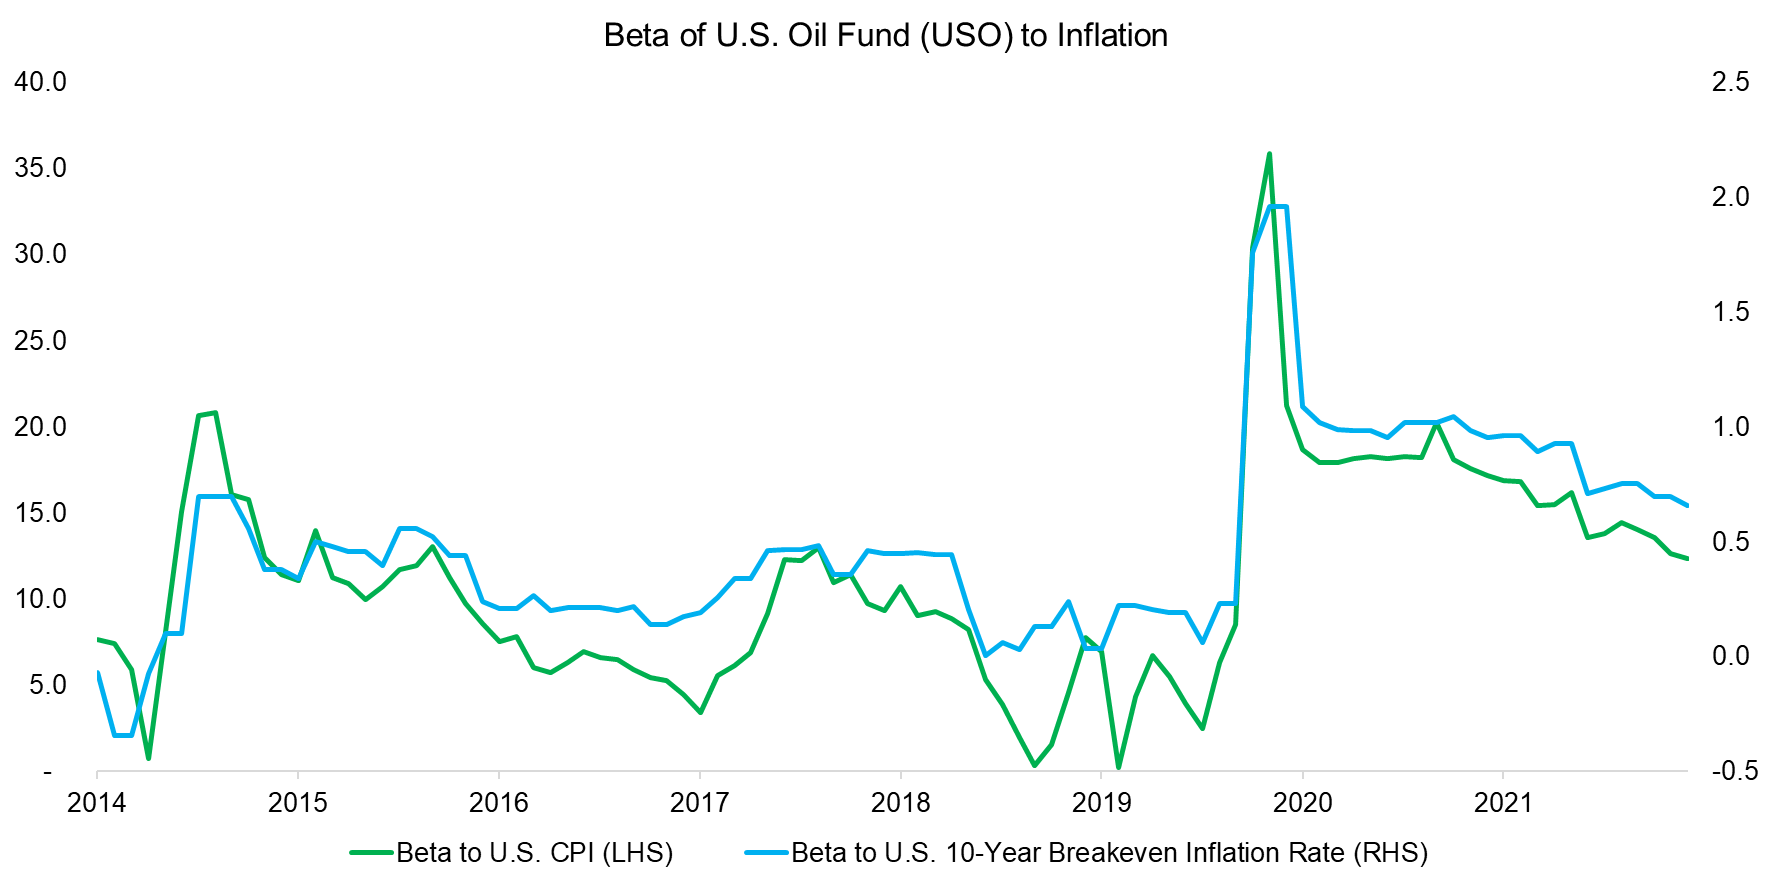 Beta of U.S. Oil Fund (USO) to Inflation